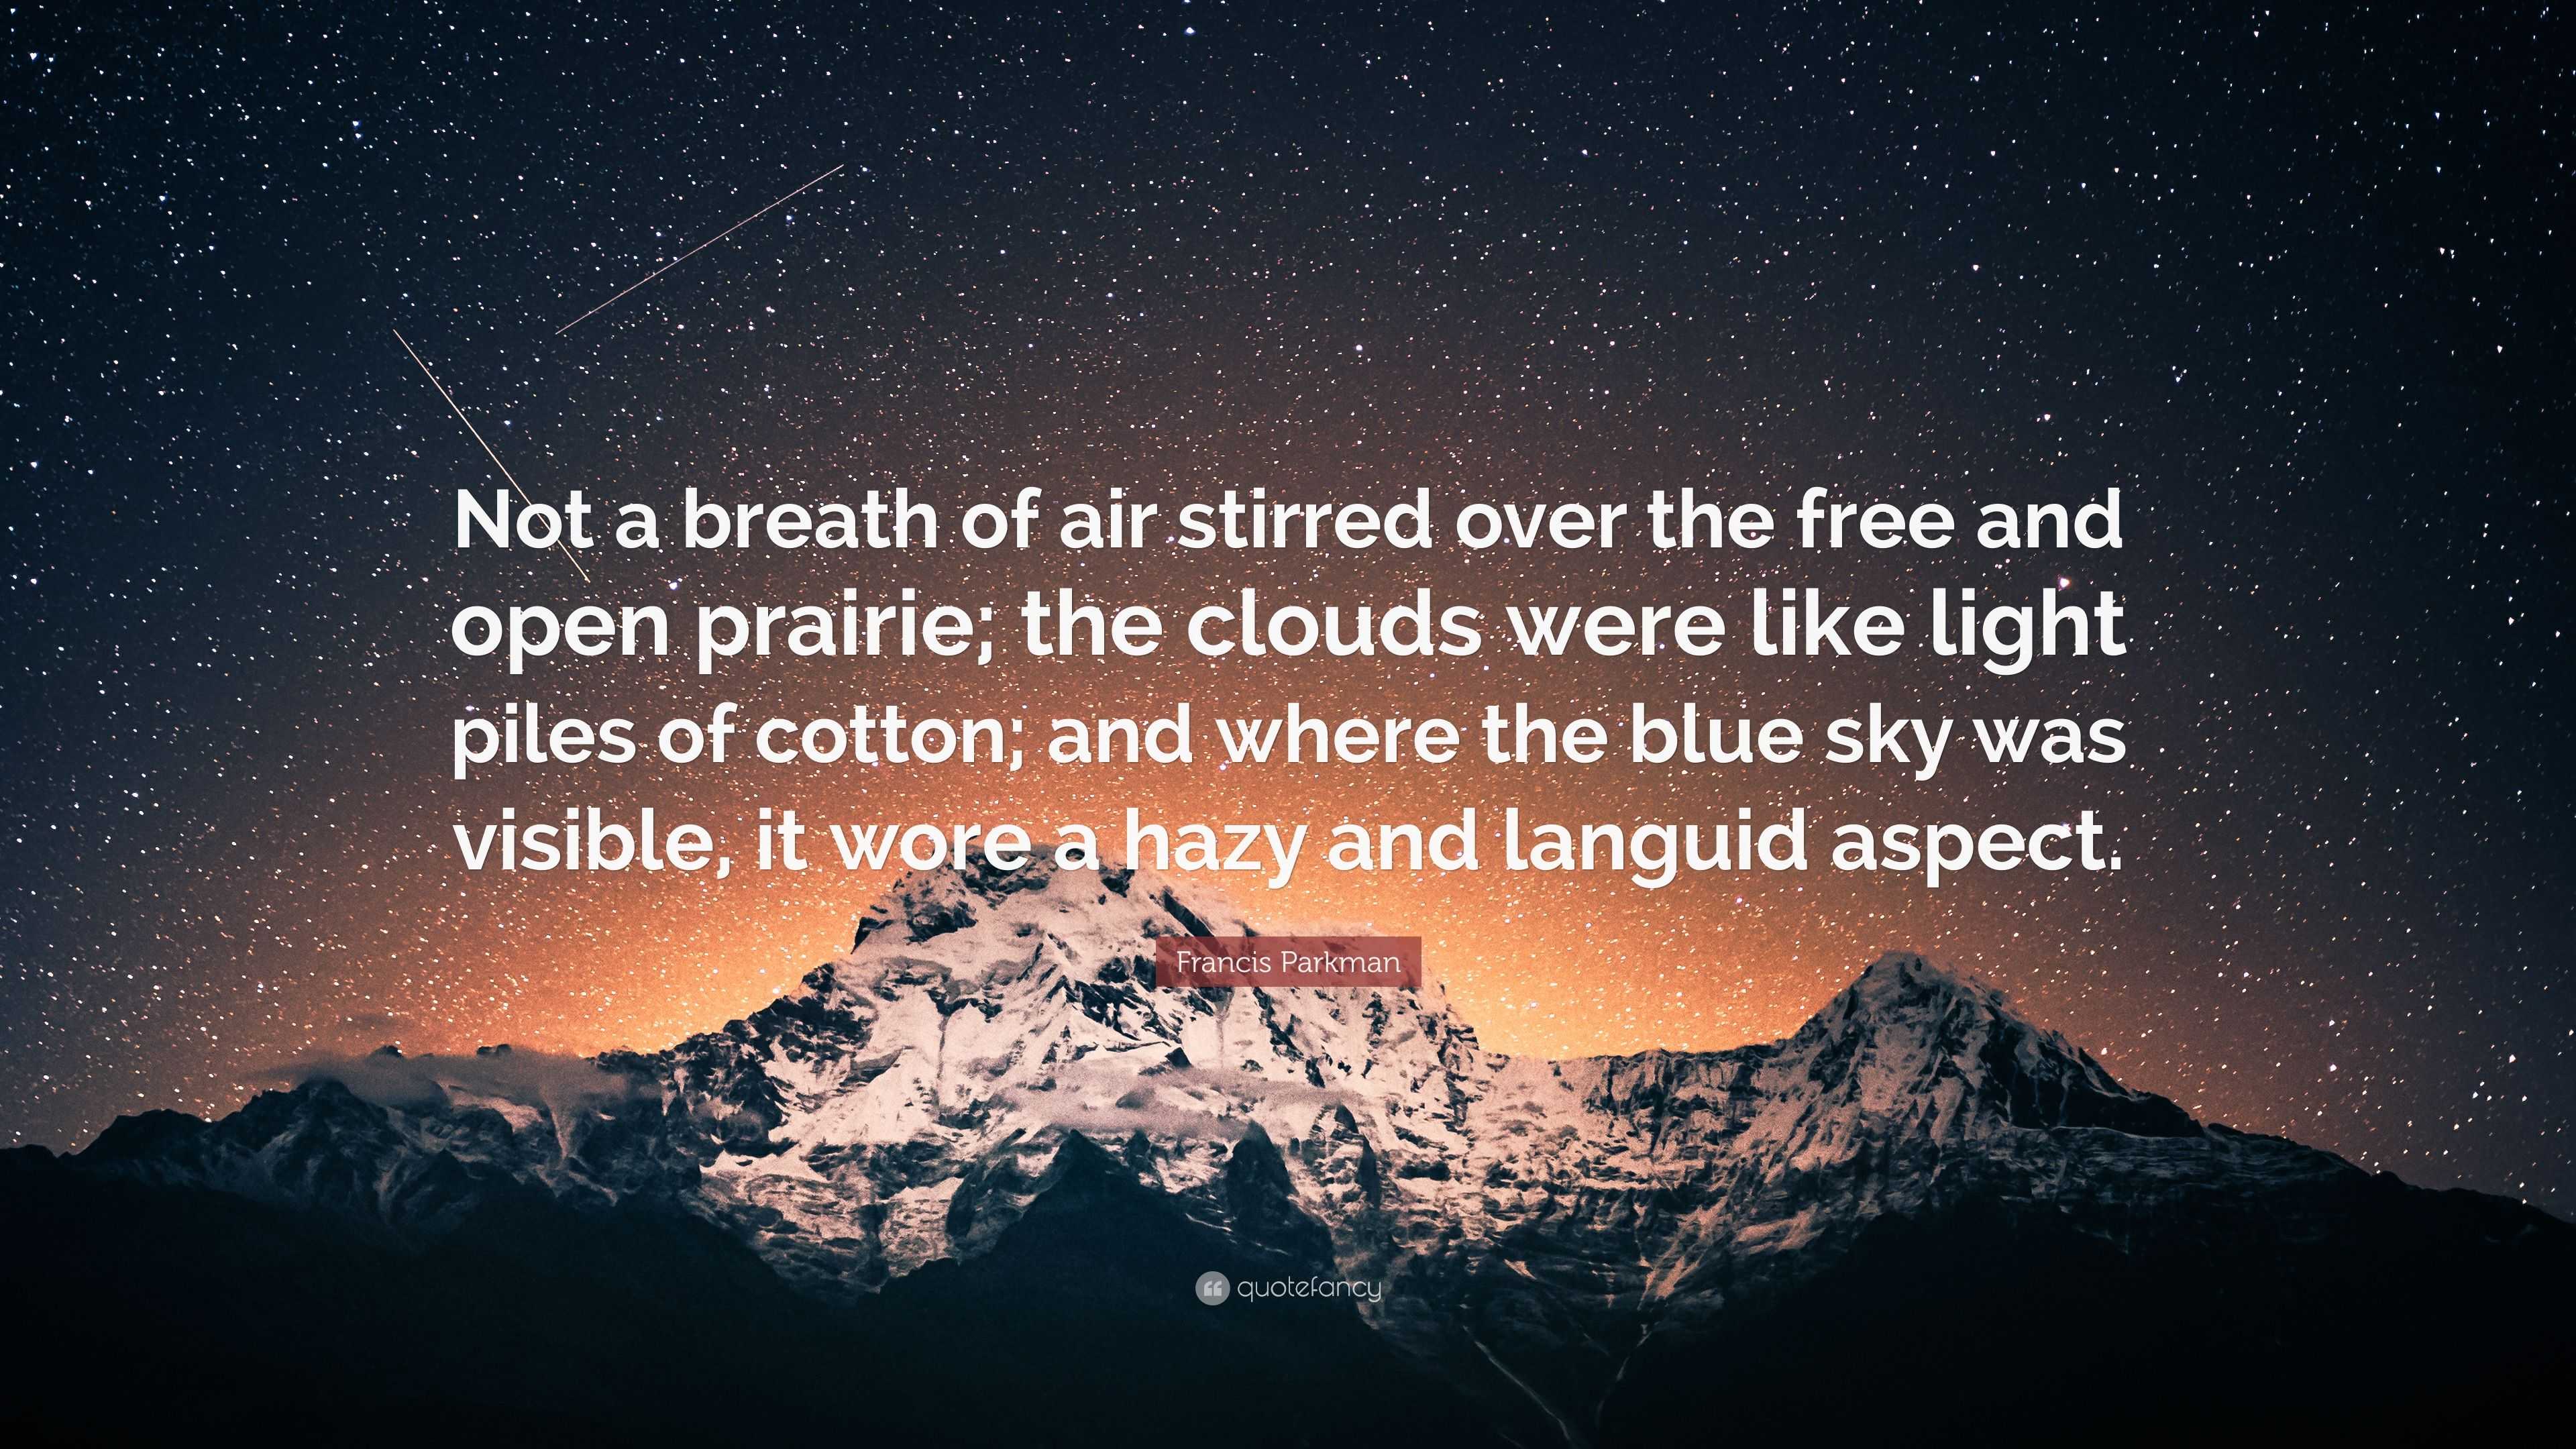 Francis Parkman Quote: “Not a breath of air stirred over the free and open  prairie; the clouds were like light piles of cotton; and where the bl...”